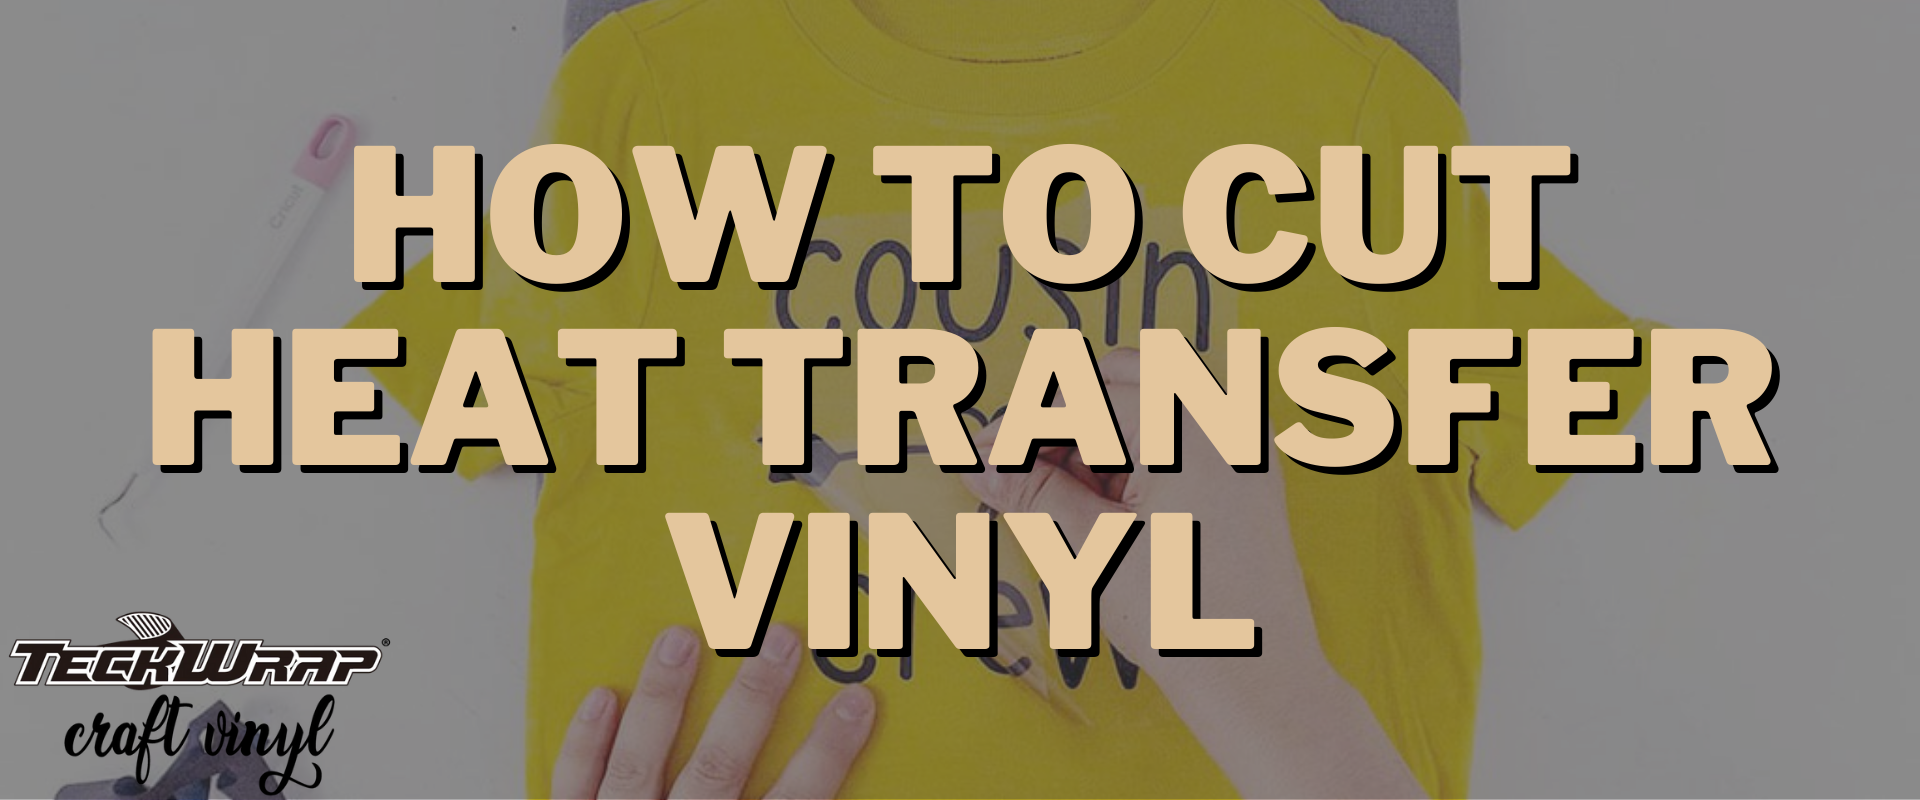 How To Remove Heat Transfer Vinyl From T-Shirts  Heat transfer vinyl,  Cricut iron on vinyl, Vinyl